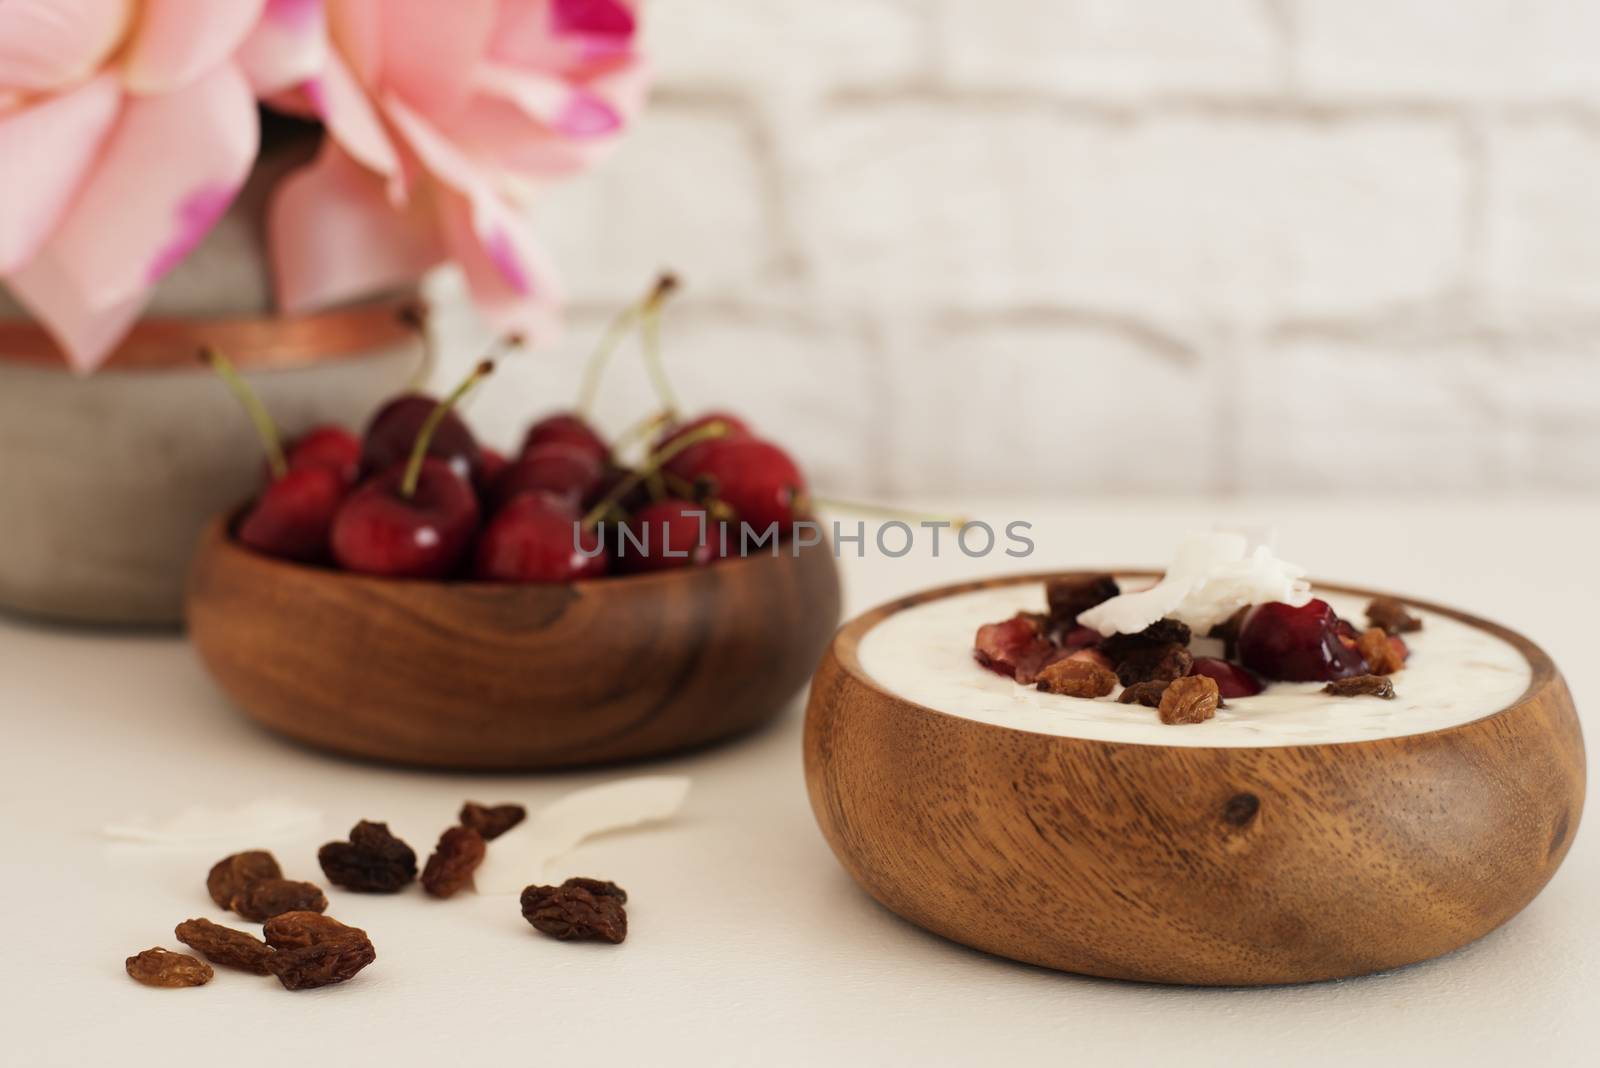 Oat Flakes With Yogurt And Fruits. Cherries, Raisins And Coconut Chips. Overnight Breakfast. Healthy Food Concept. Fitness Mood Diet. Summer Light Snack. Bright Brick Wall Background. 